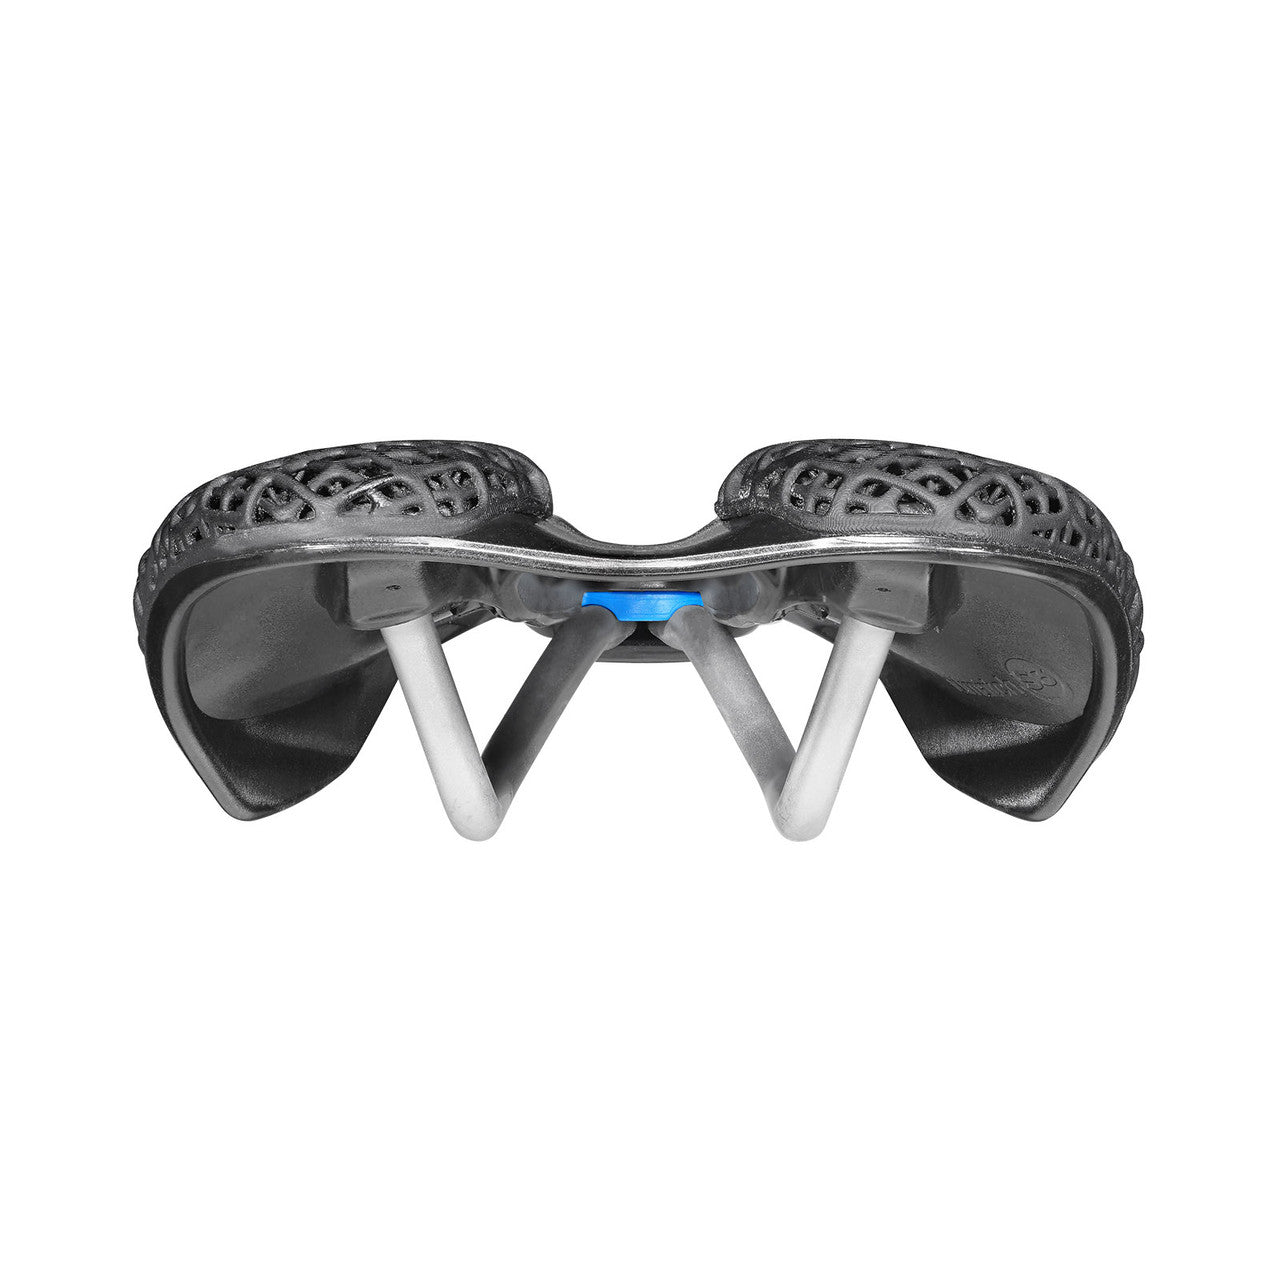 Selle - Selle Boost 3D Ti 316 Superflow S3 